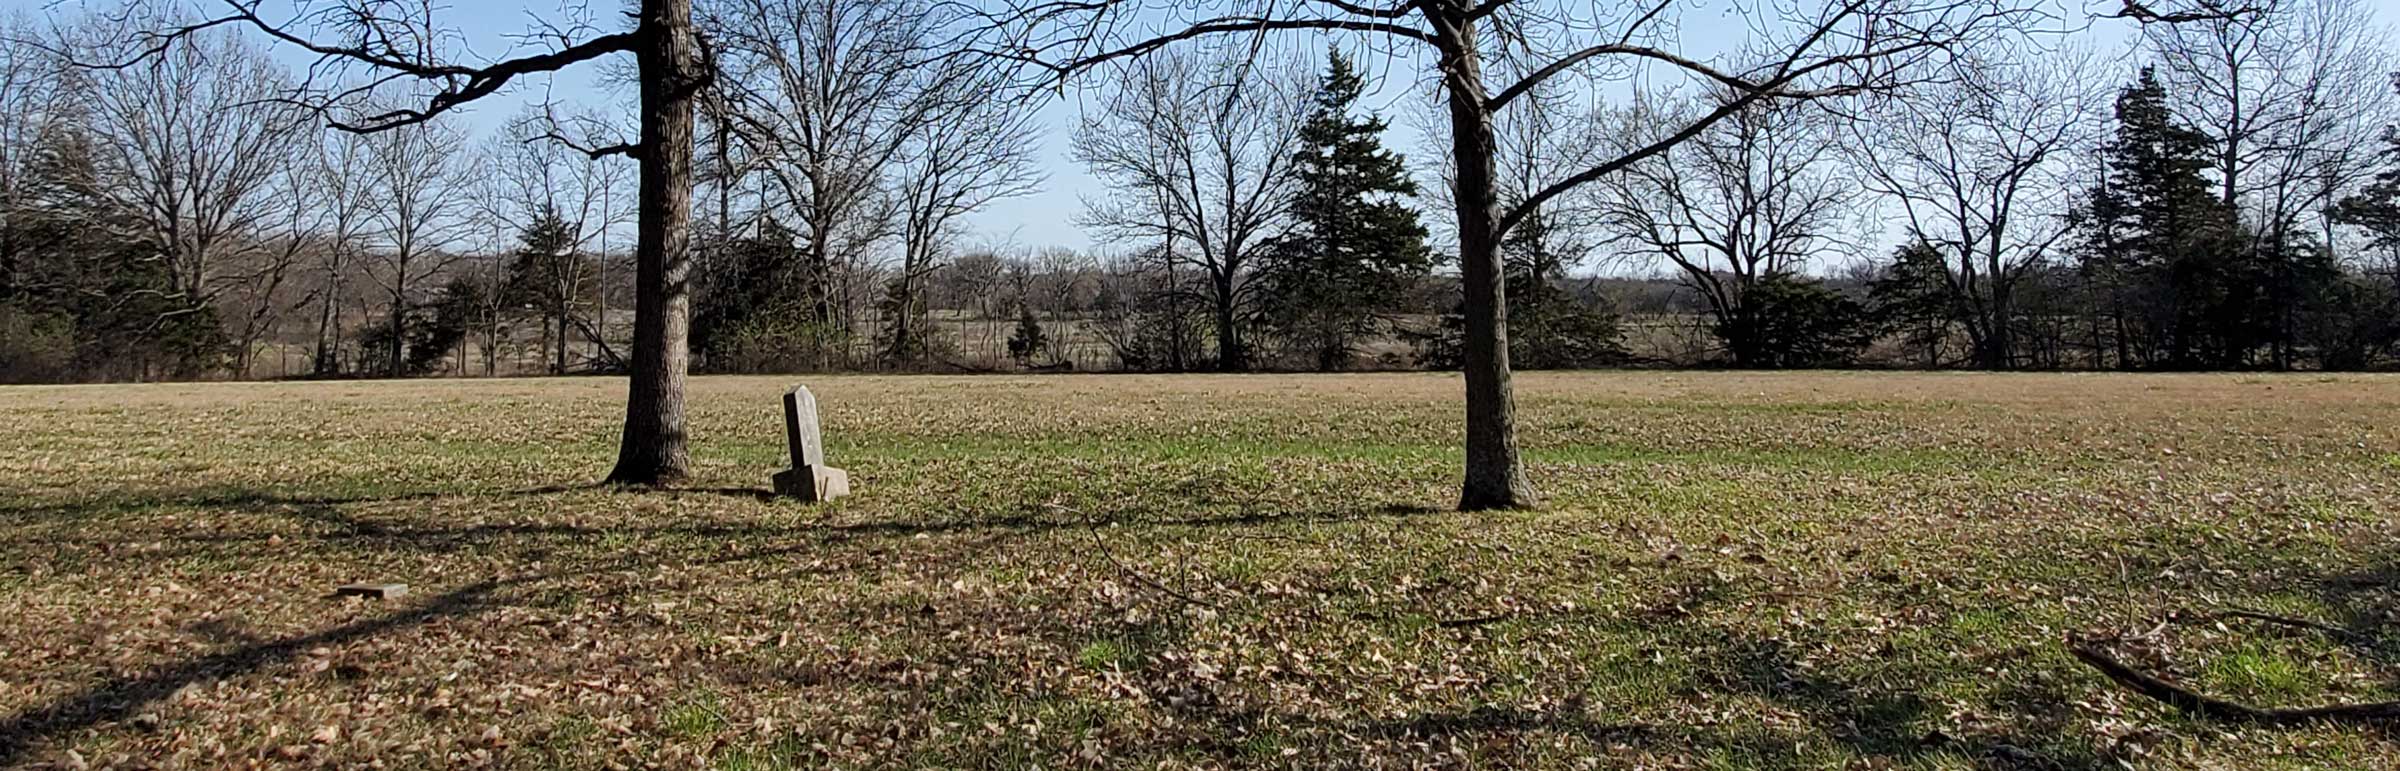 wide photo depicting two main trees and a stone marker on a lawn